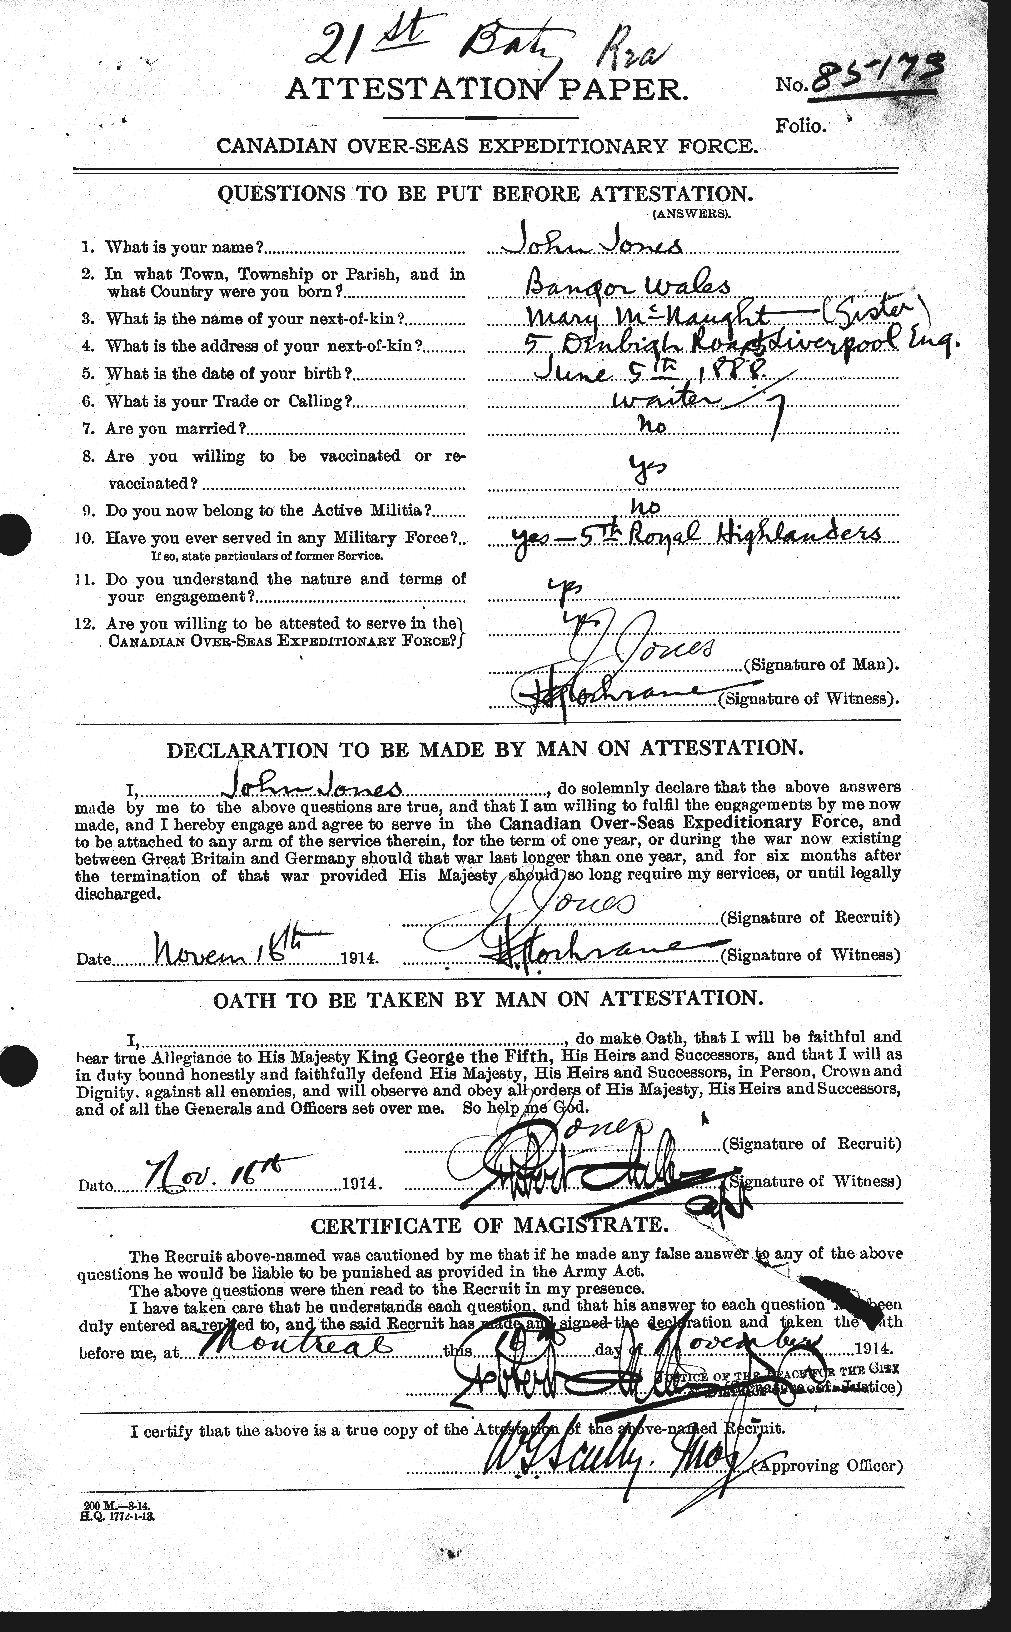 Personnel Records of the First World War - CEF 427477a